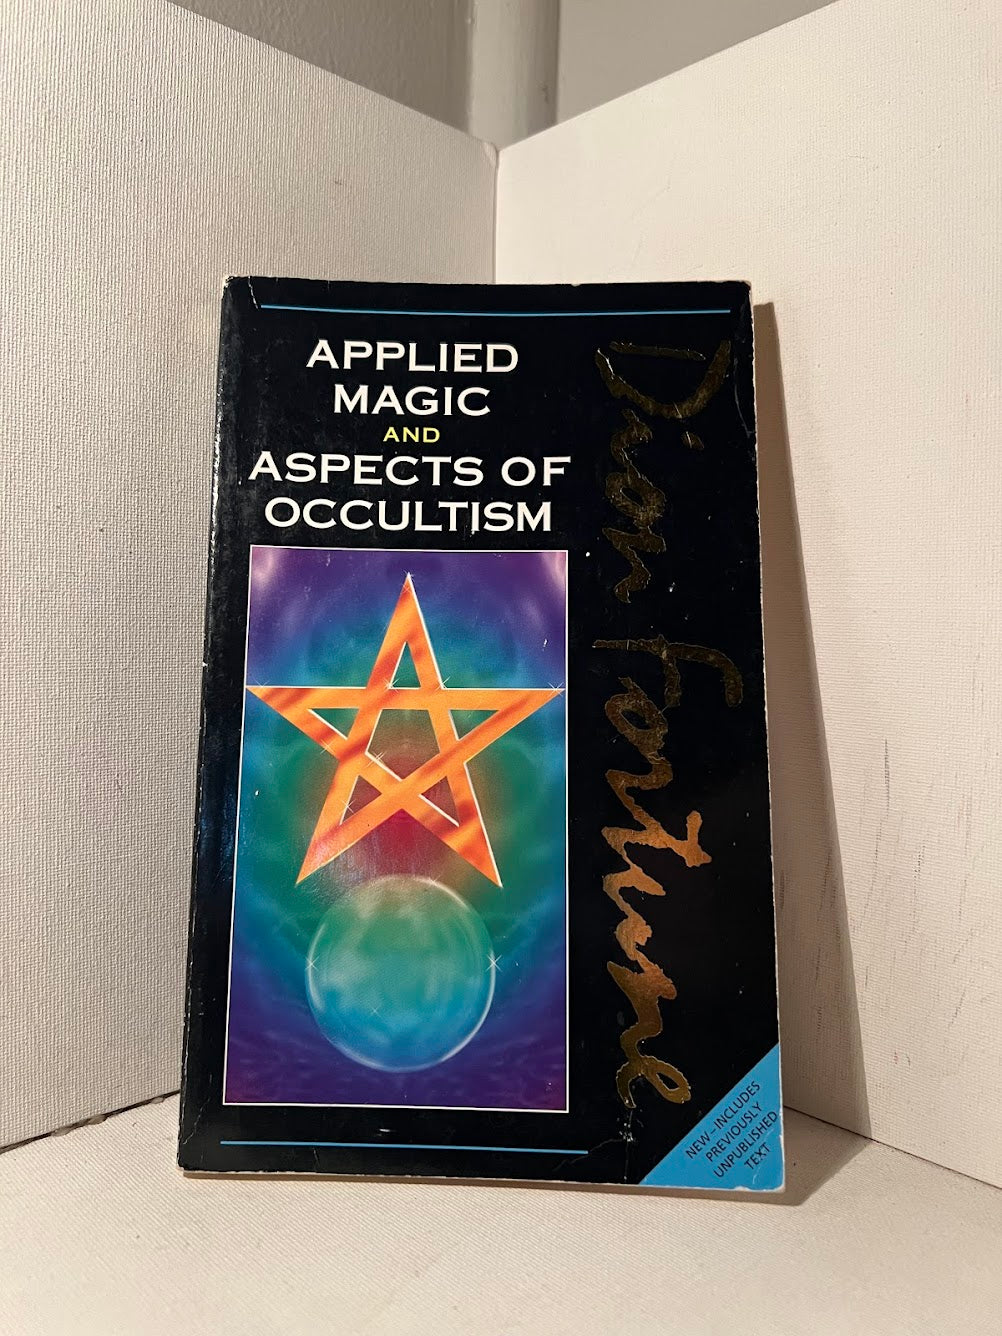 Applied Magic and Aspects of Occultism by Dion Fortune